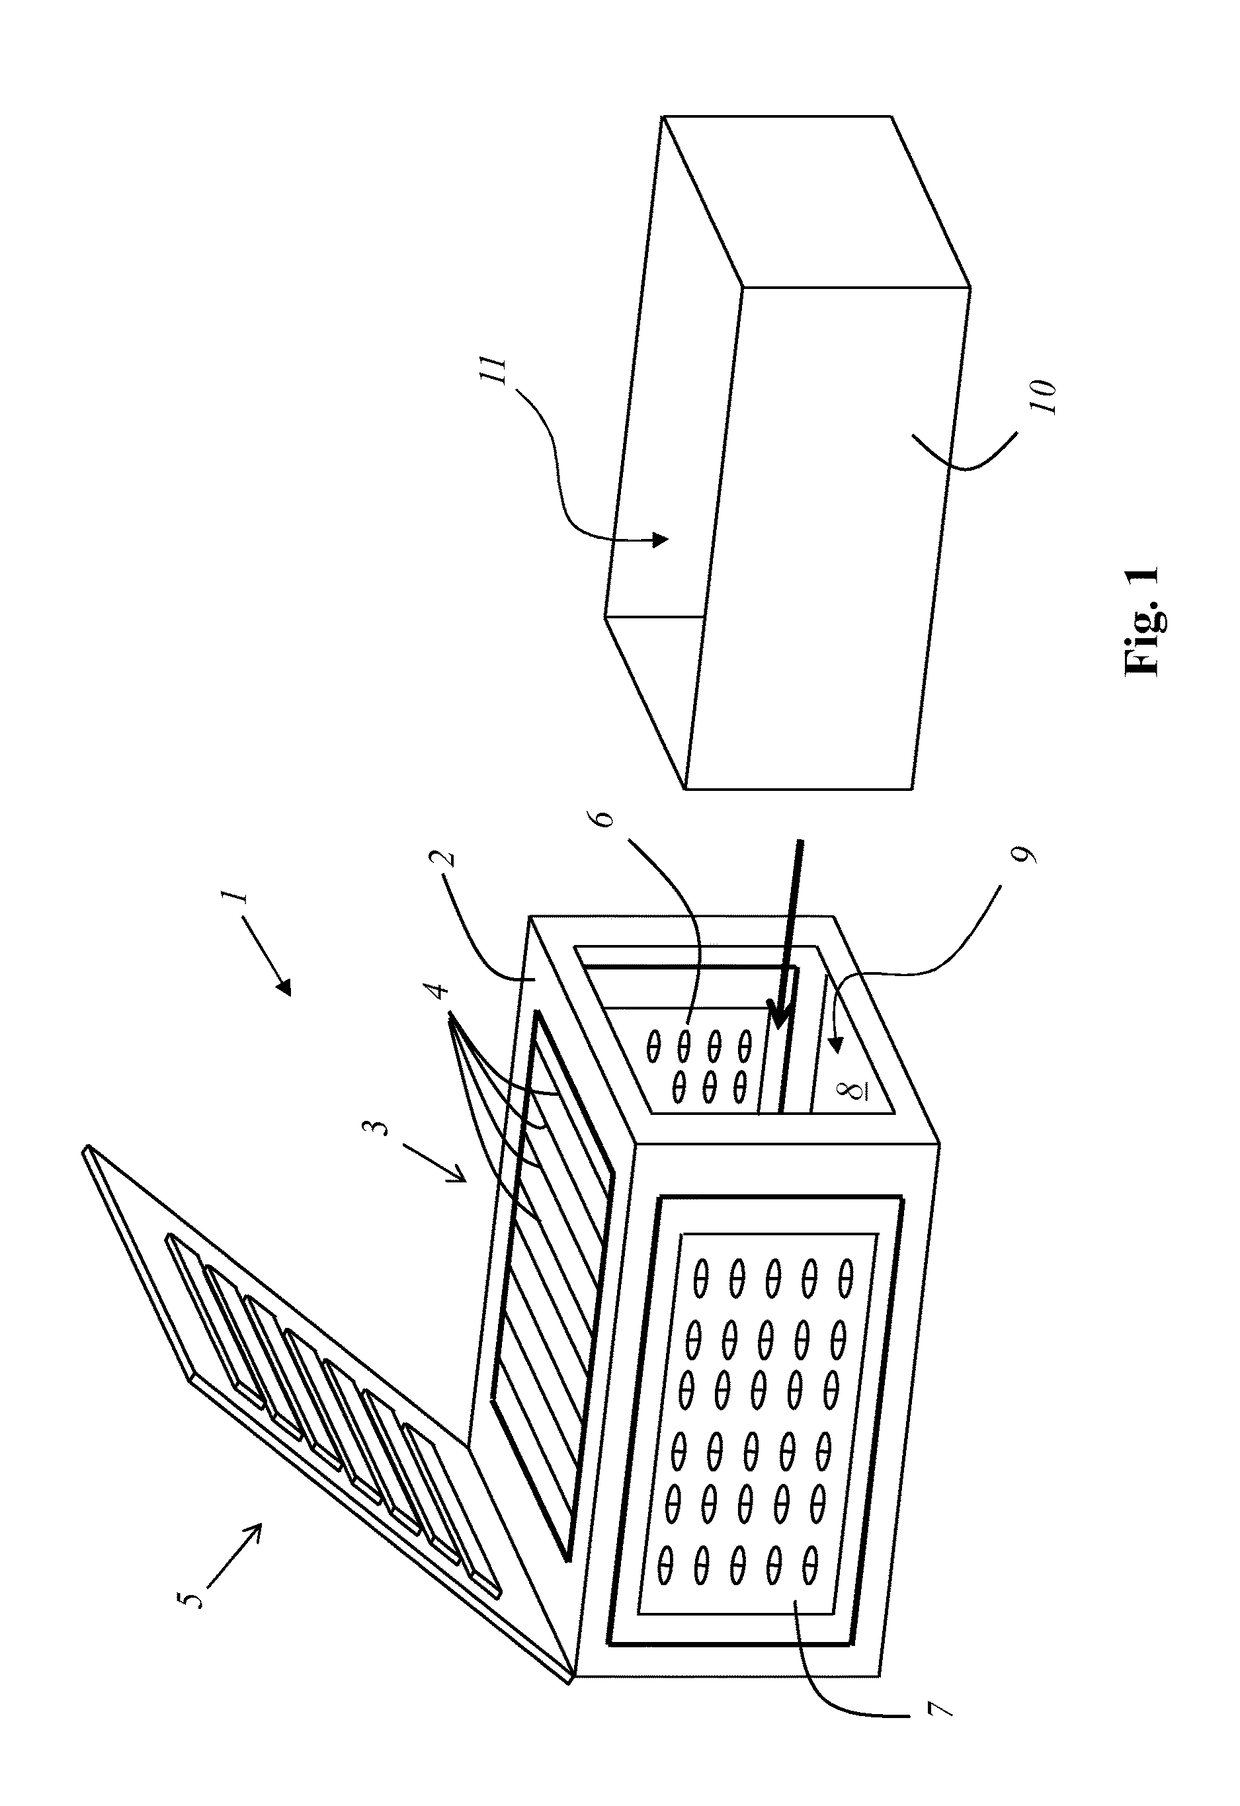 Food comminution device